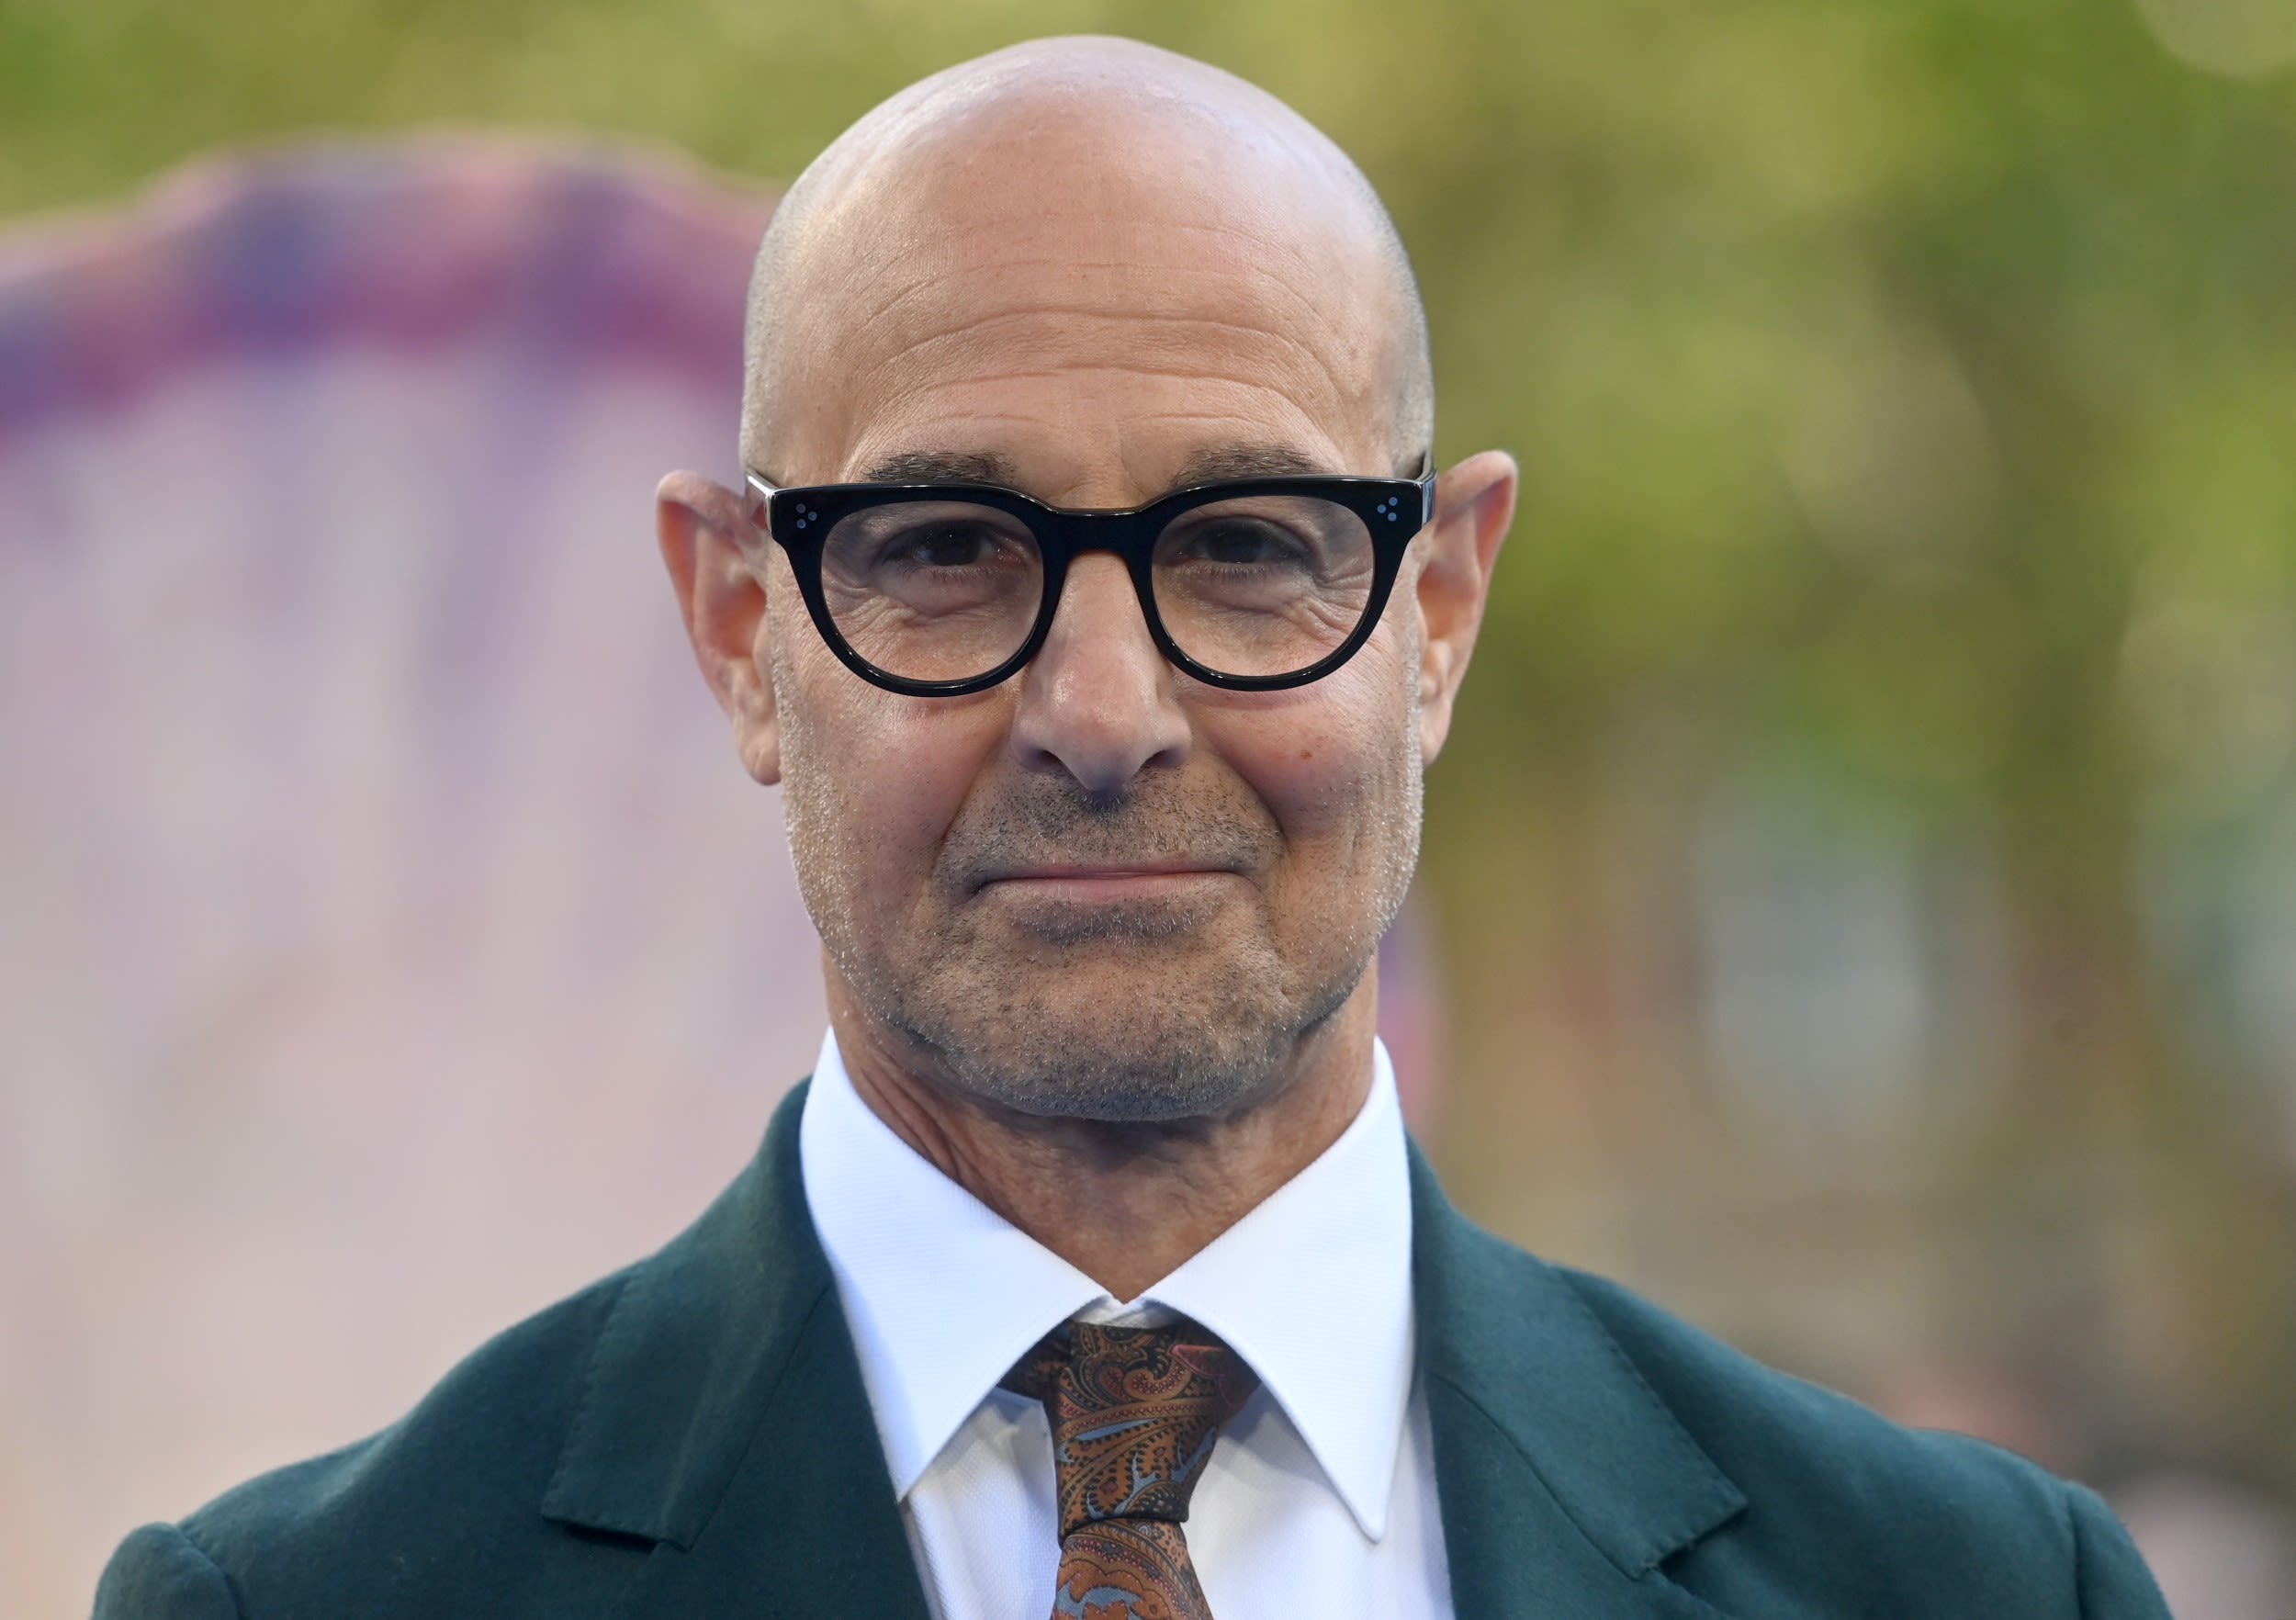 Stanley Tucci compares WW2 fascism story to now—"It's happening today"